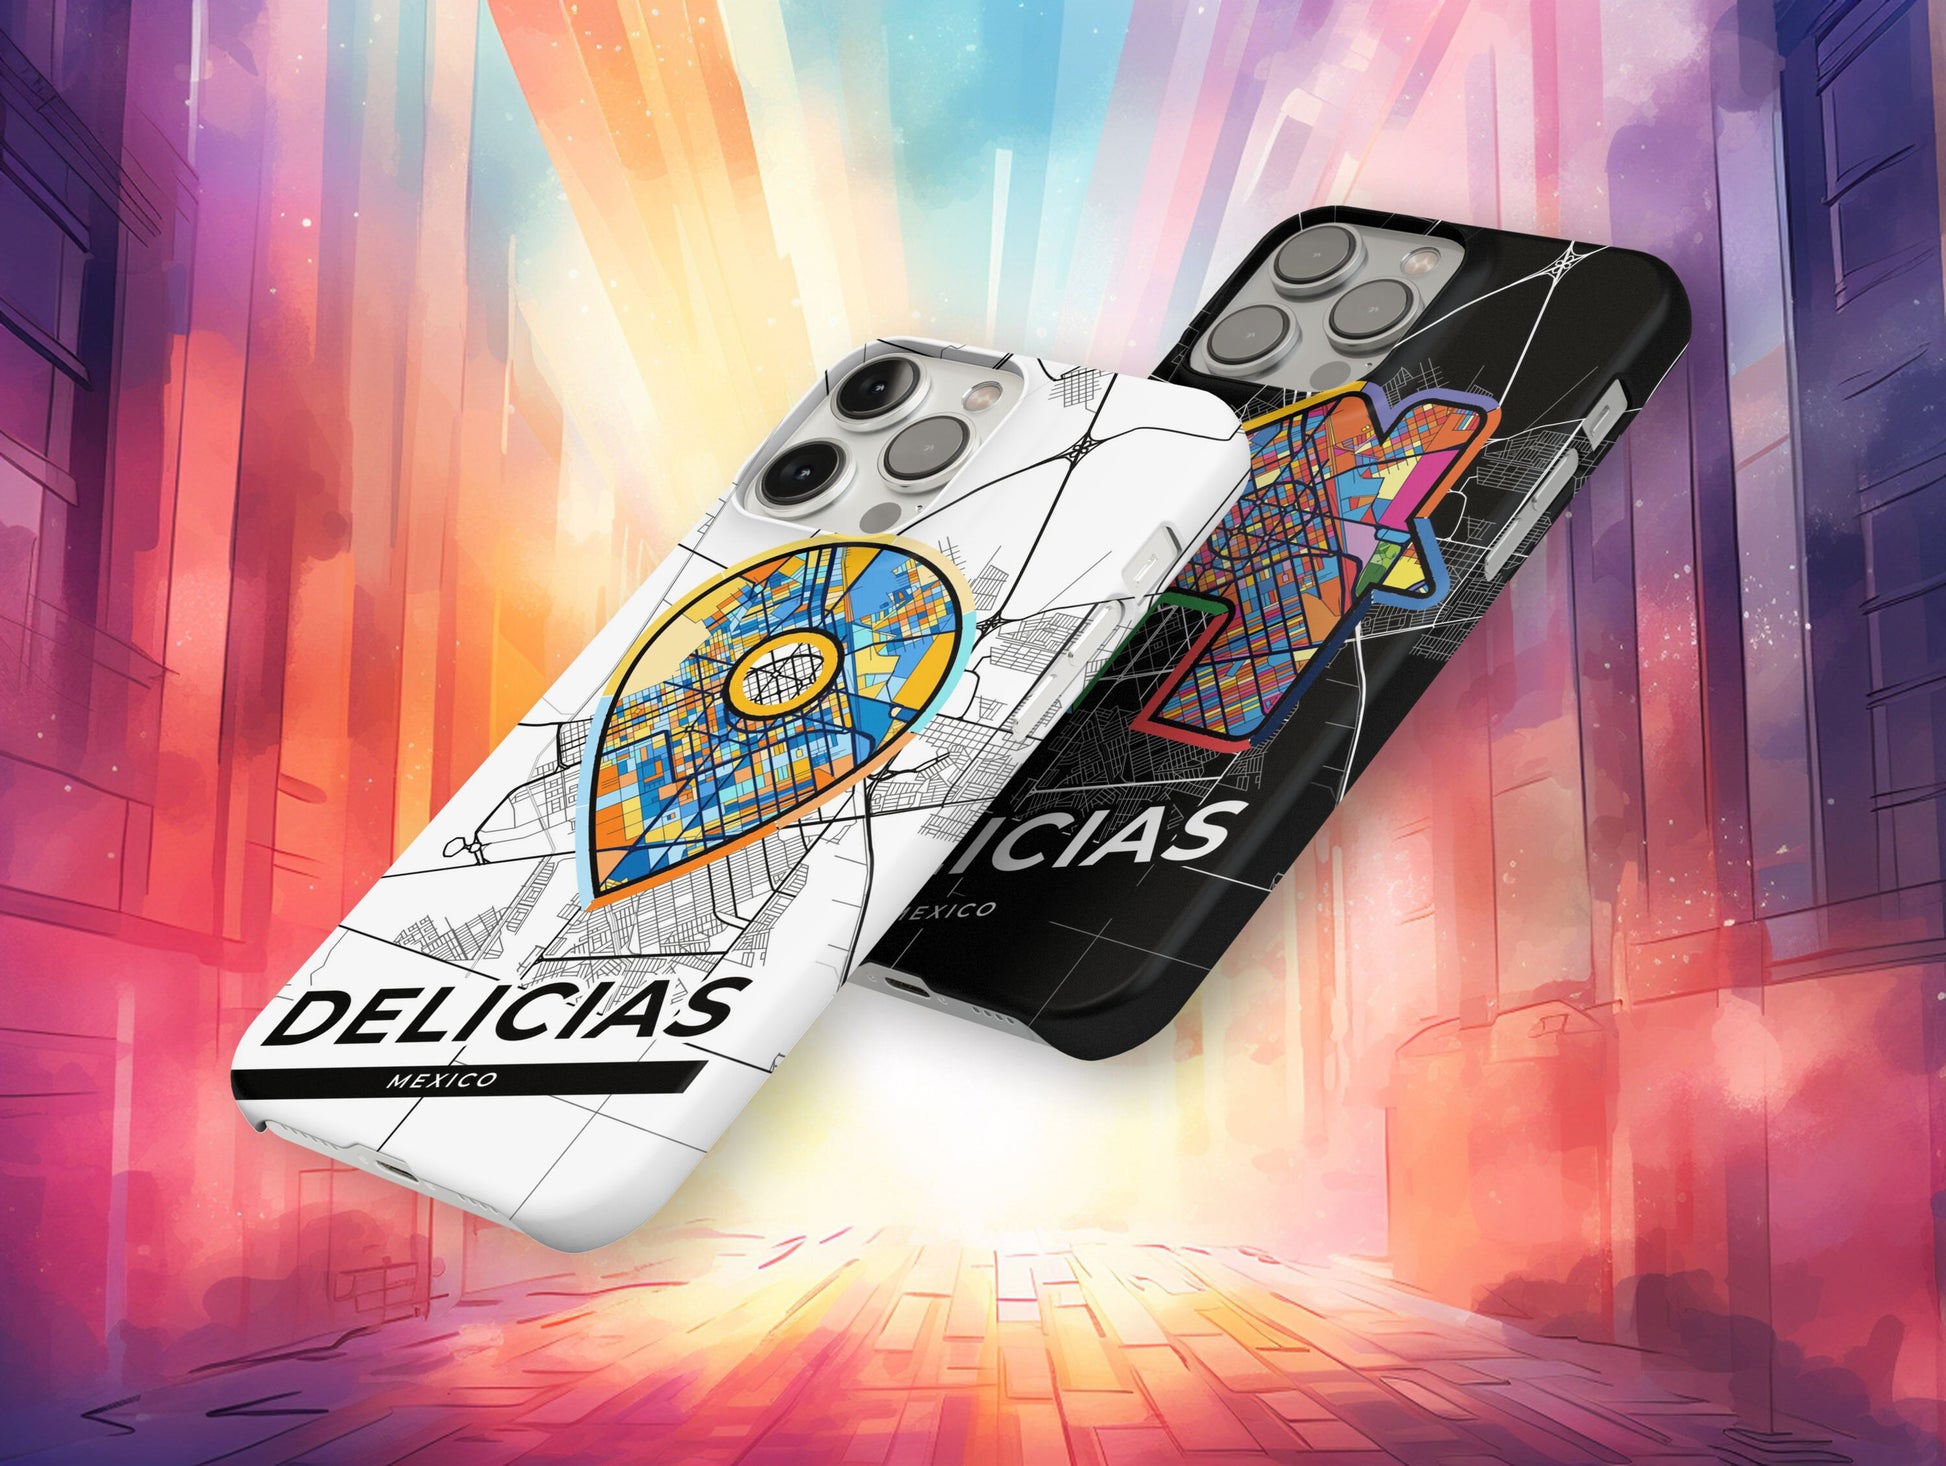 Delicias Mexico slim phone case with colorful icon. Birthday, wedding or housewarming gift. Couple match cases.